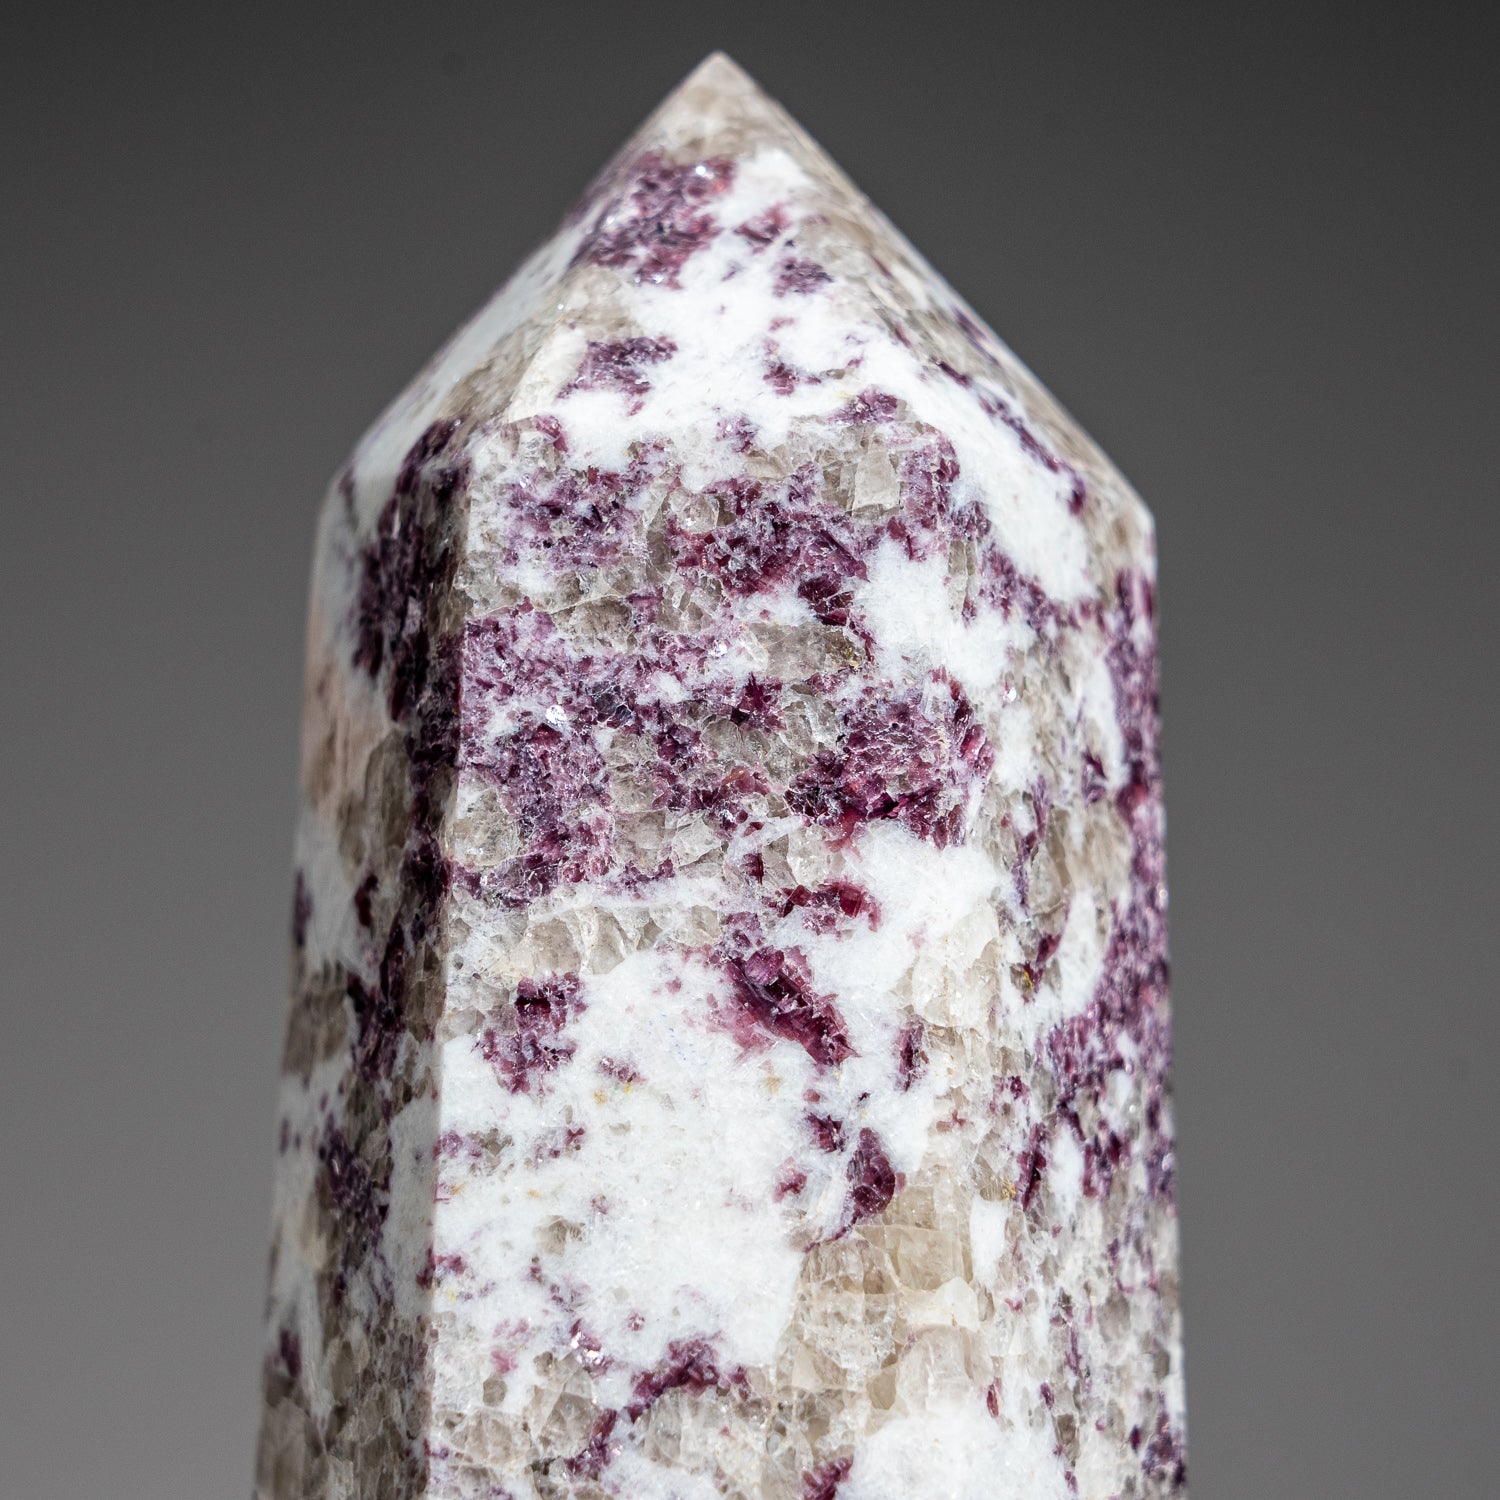 Polished Ruby in Quartz Point from India (3 lbs)